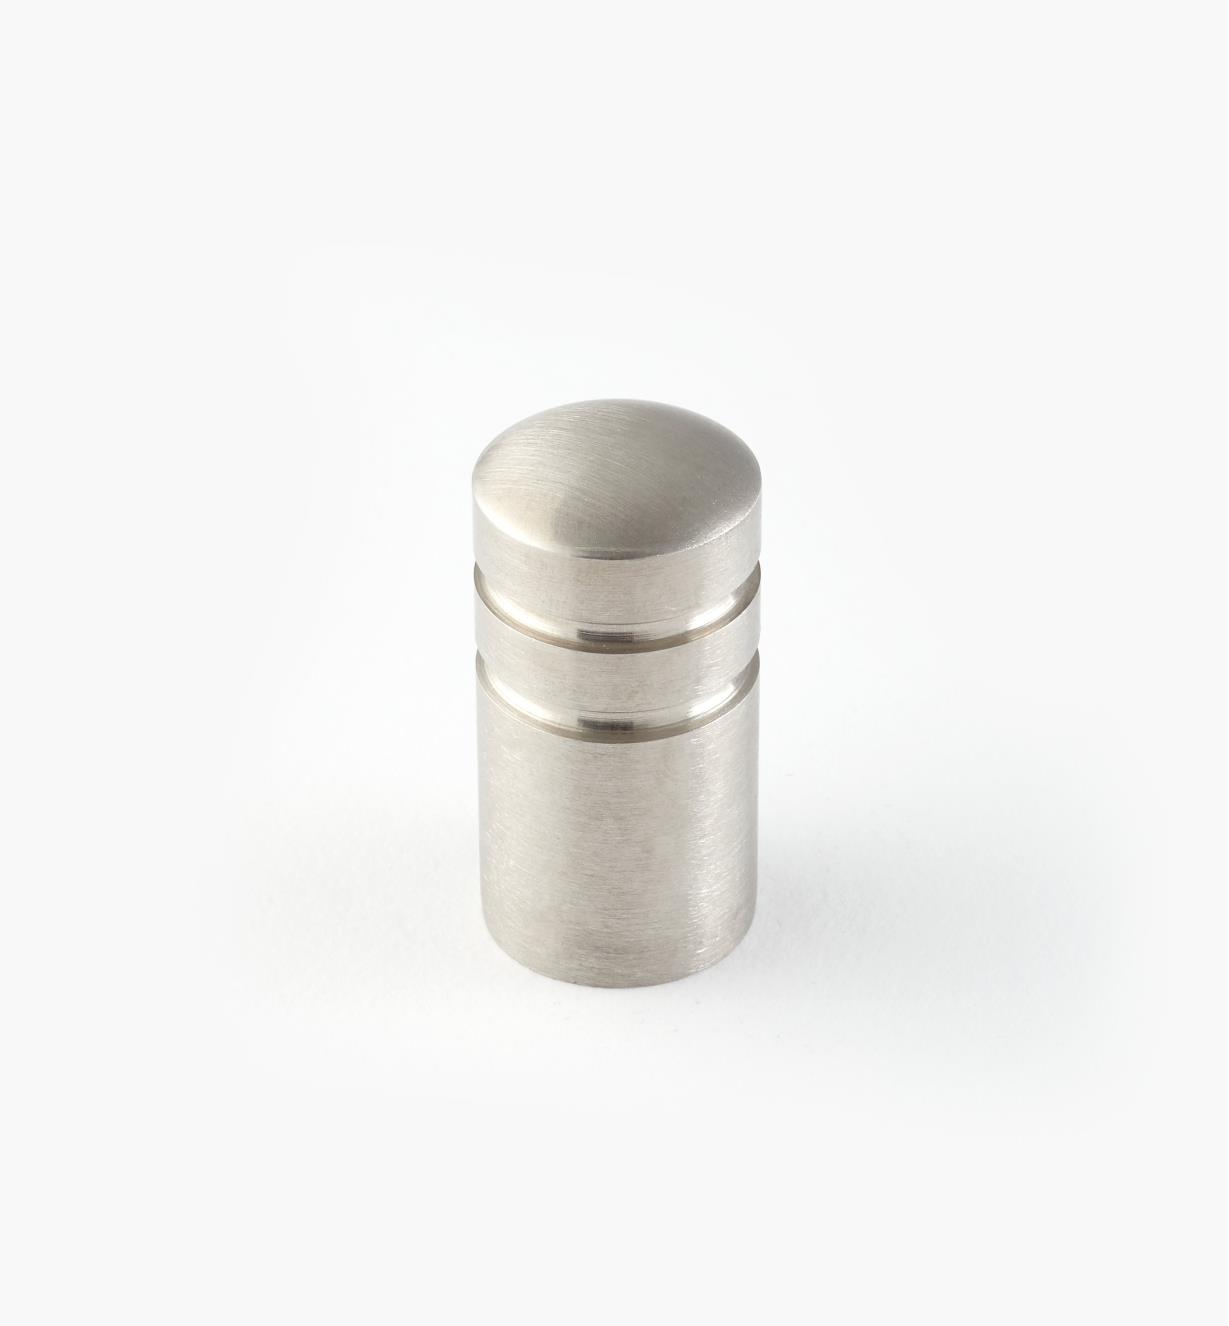 01W6950 - 15mm x 30mm Stainless Steel Ribbed Knob